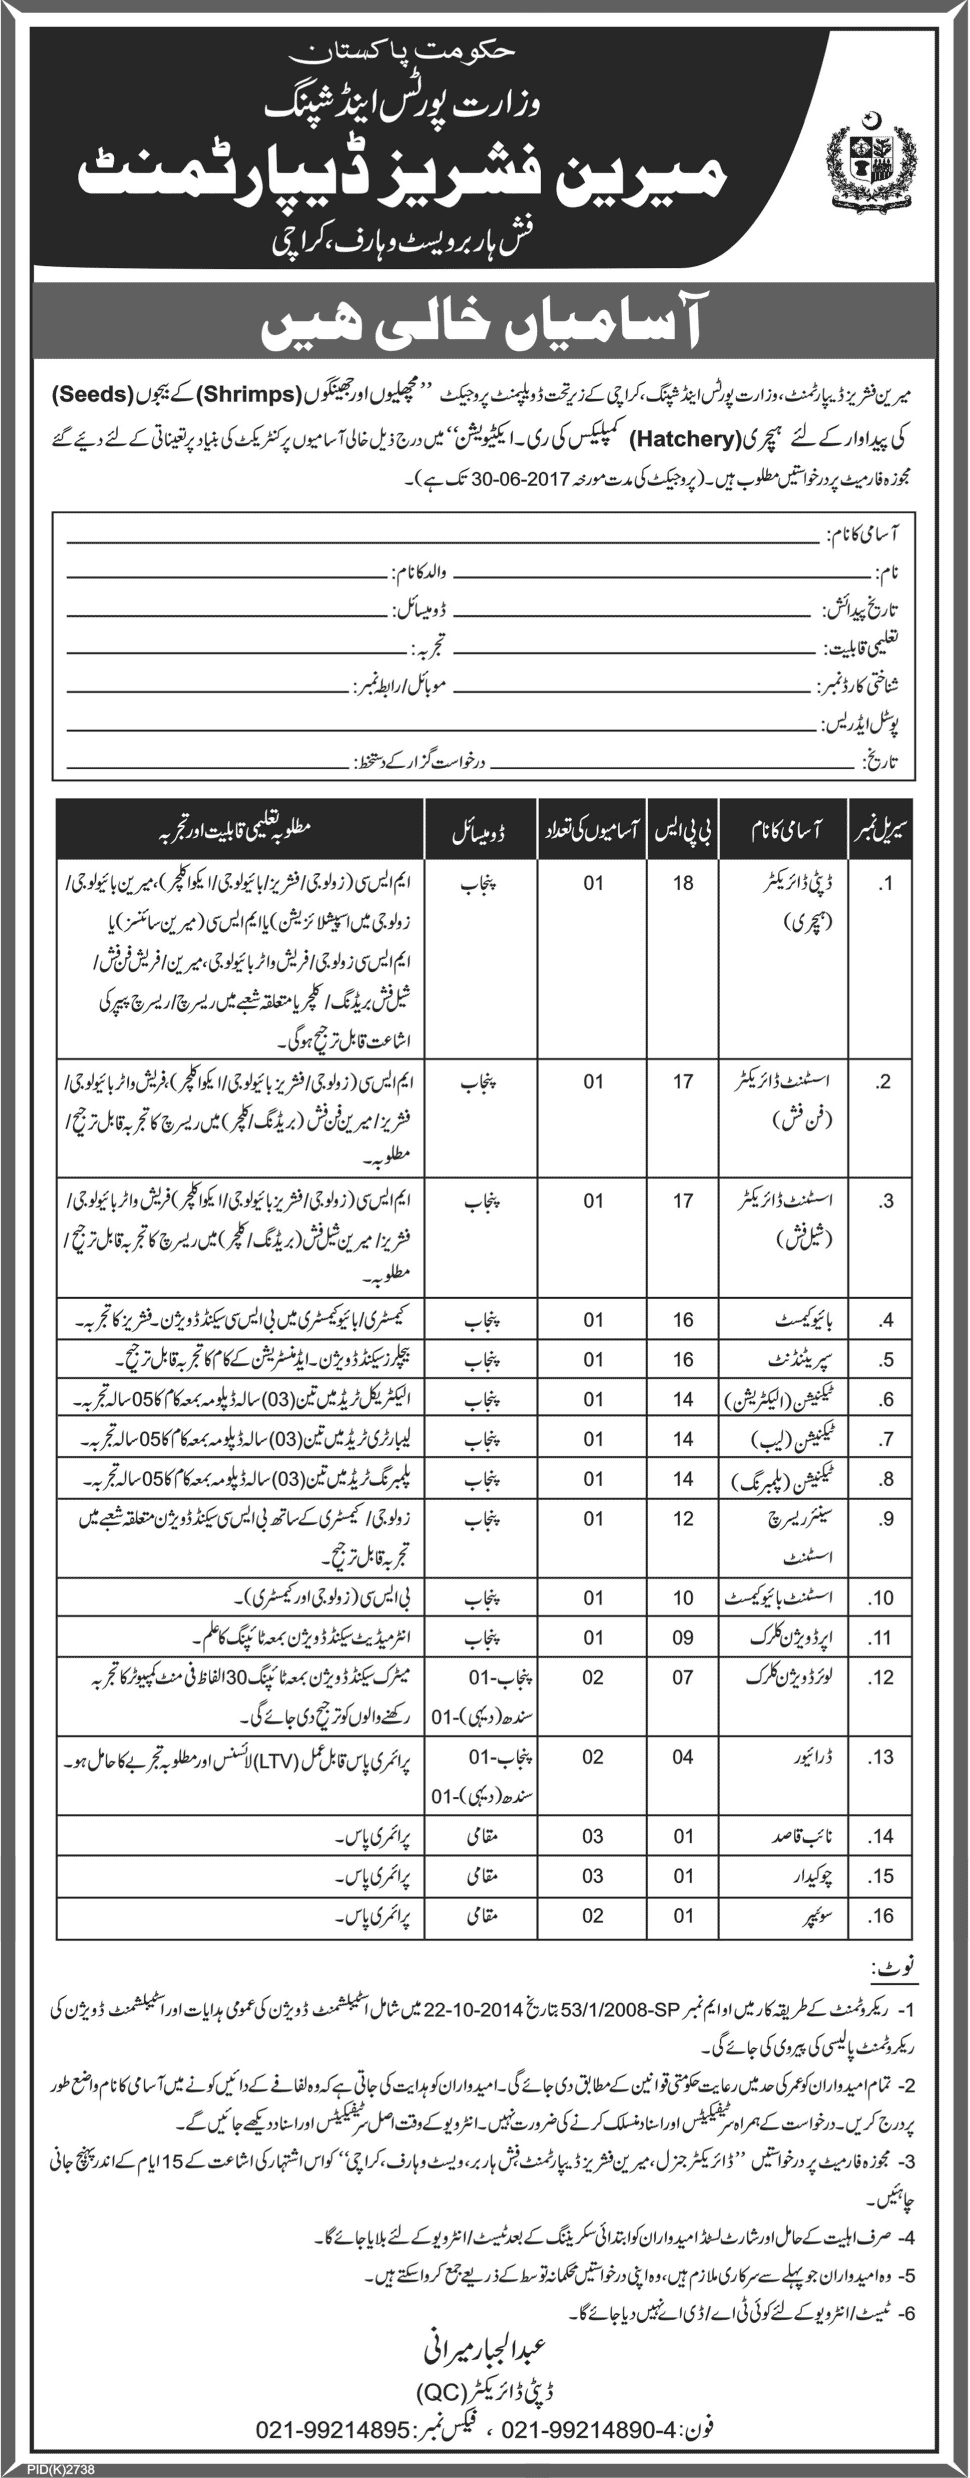 Marine Fisheries Department Jobs 2015 Eligibility, Form Last Date